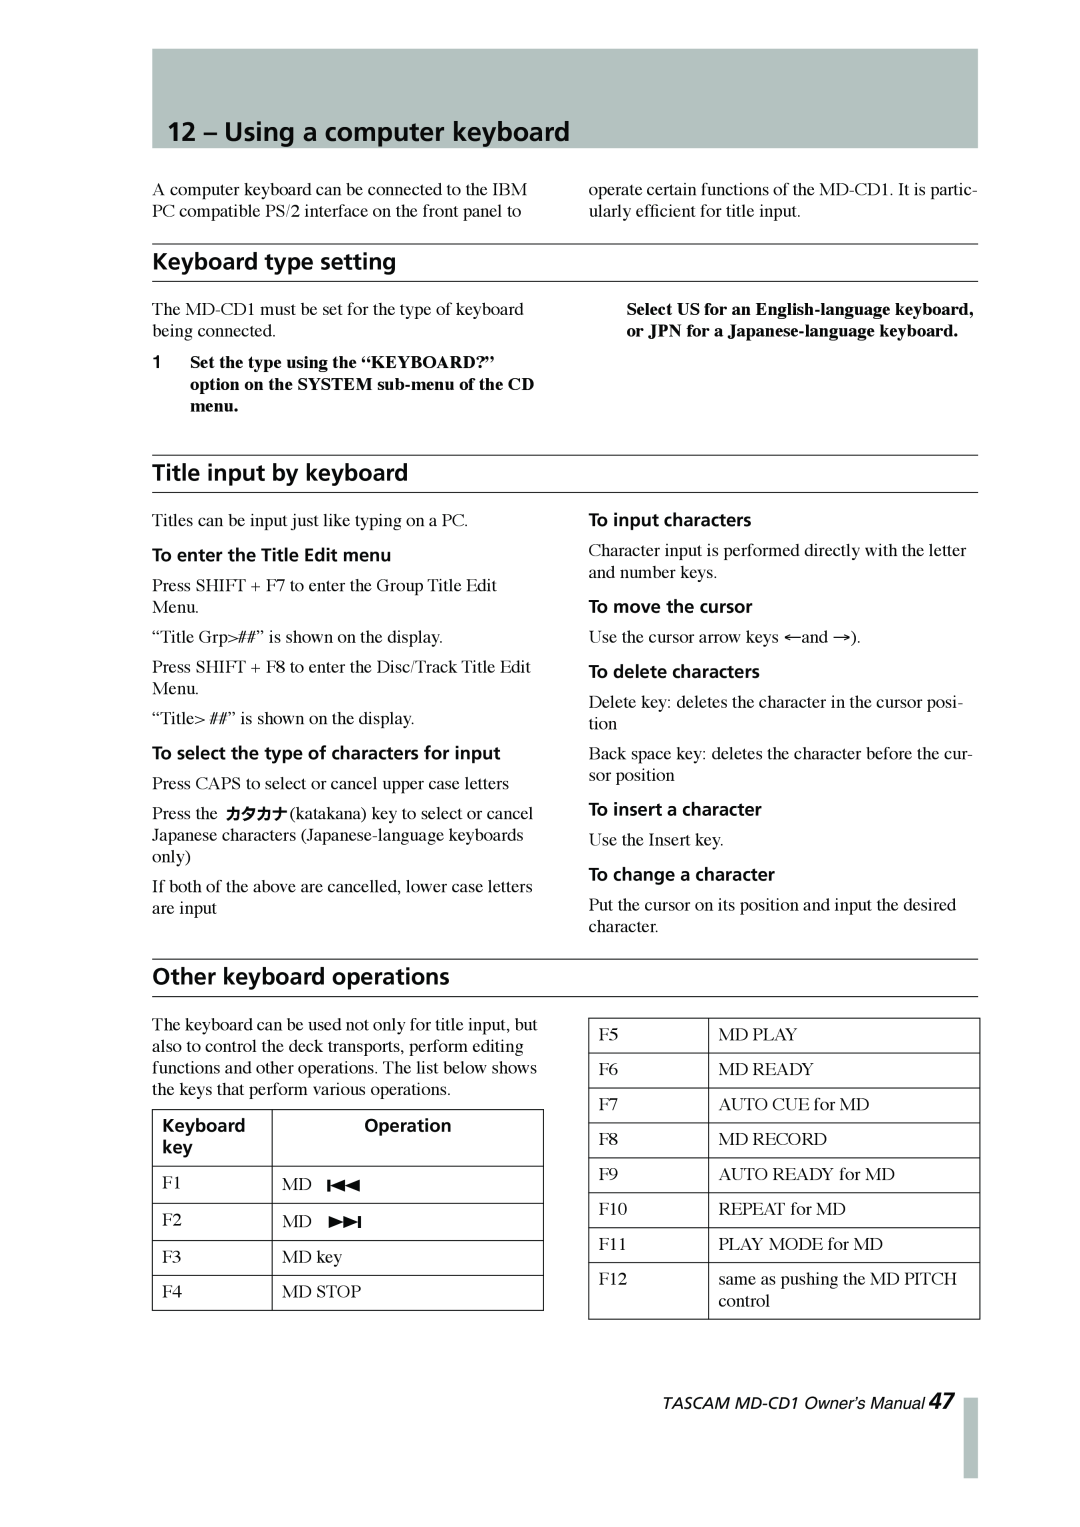 Tascam MD-CD1 Using a computer keyboard, Keyboard type setting, Title input by keyboard, Other keyboard operations 